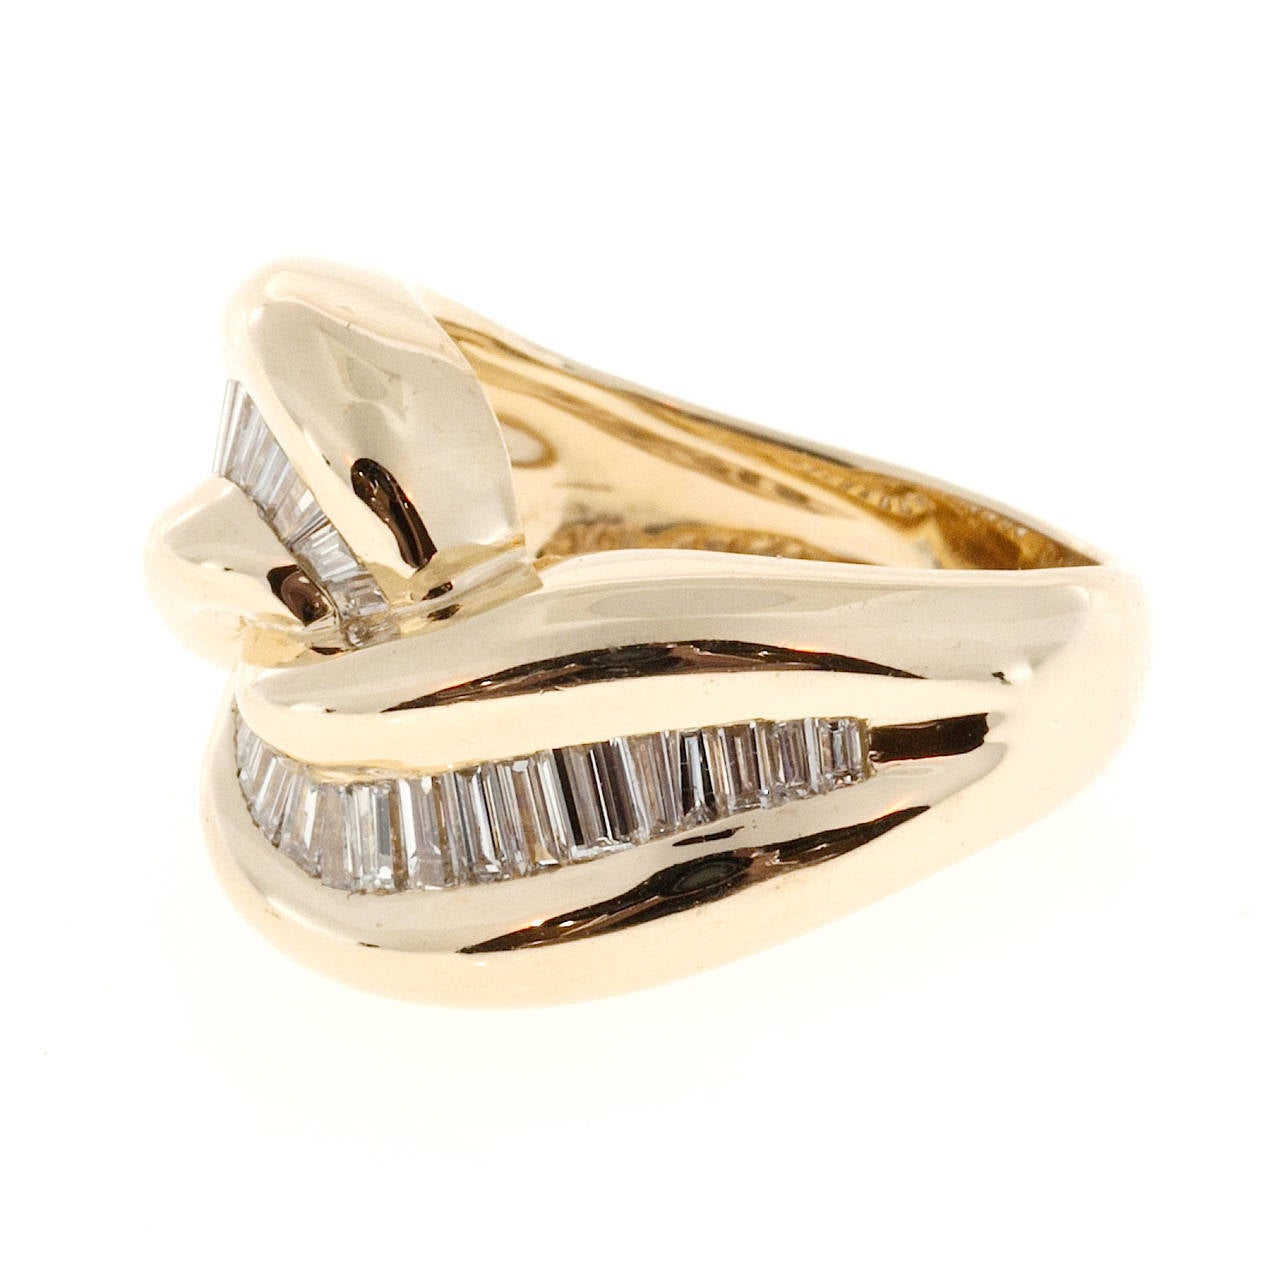 Swirl design 1960 high grade baguette diamond ring. Signed KA, number 4761.

36 baguette diamonds, approx. total weight .70cts, F, VS – SI
14k yellow gold
Tested and stamped: 14k
Hallmark: KA 4761
8.3 grams
Width at top: 14.35mm
Height at